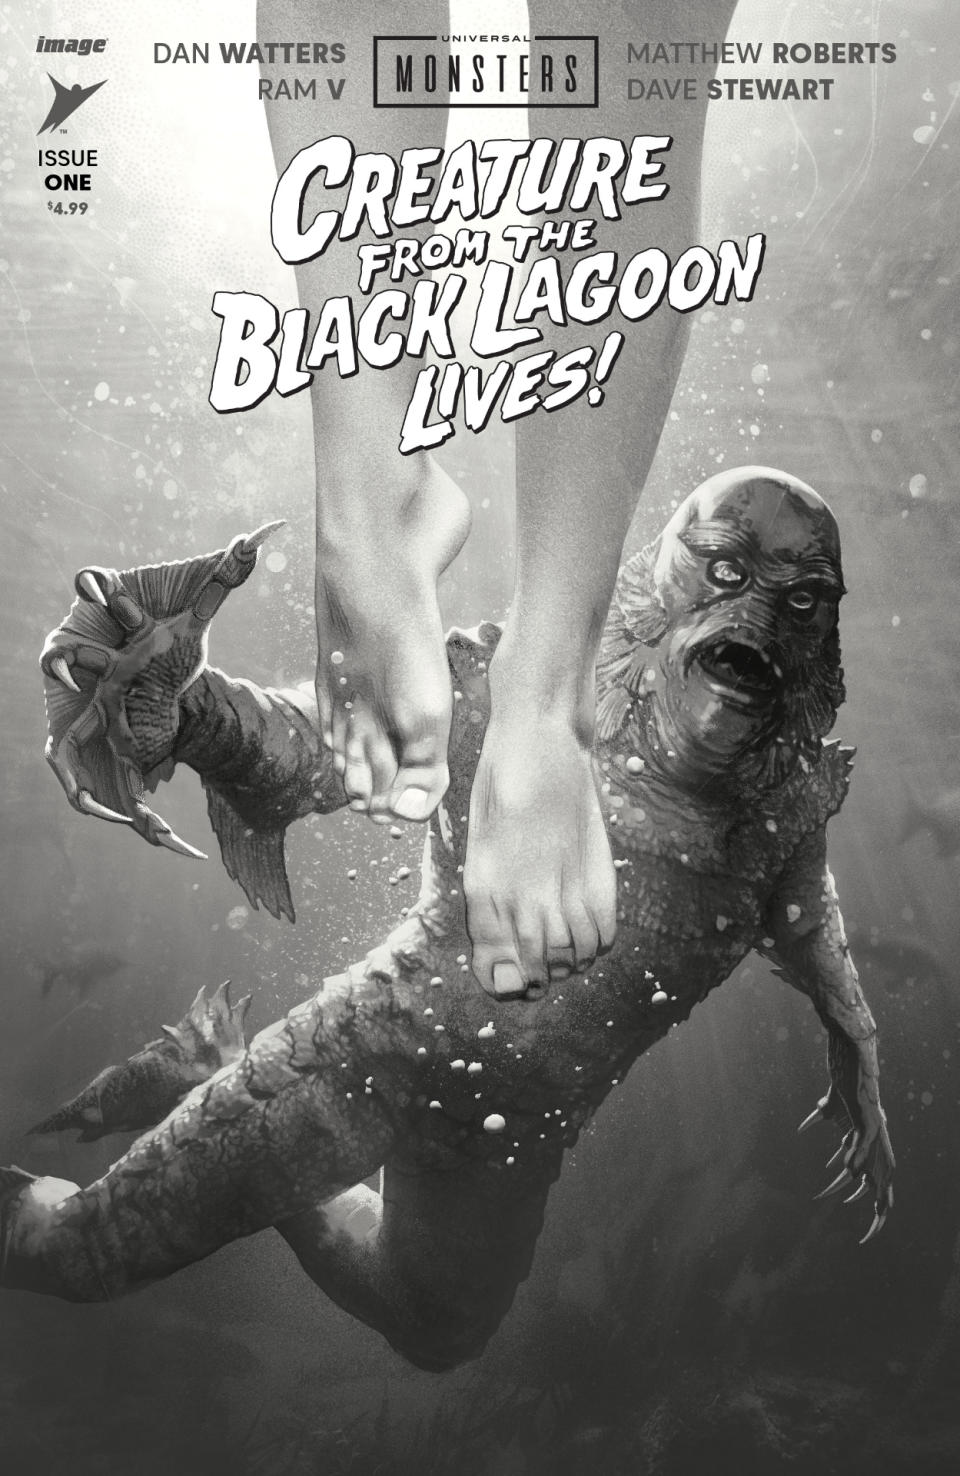 Universal Monsters: Creature From the Black Lagoon Lives! #1